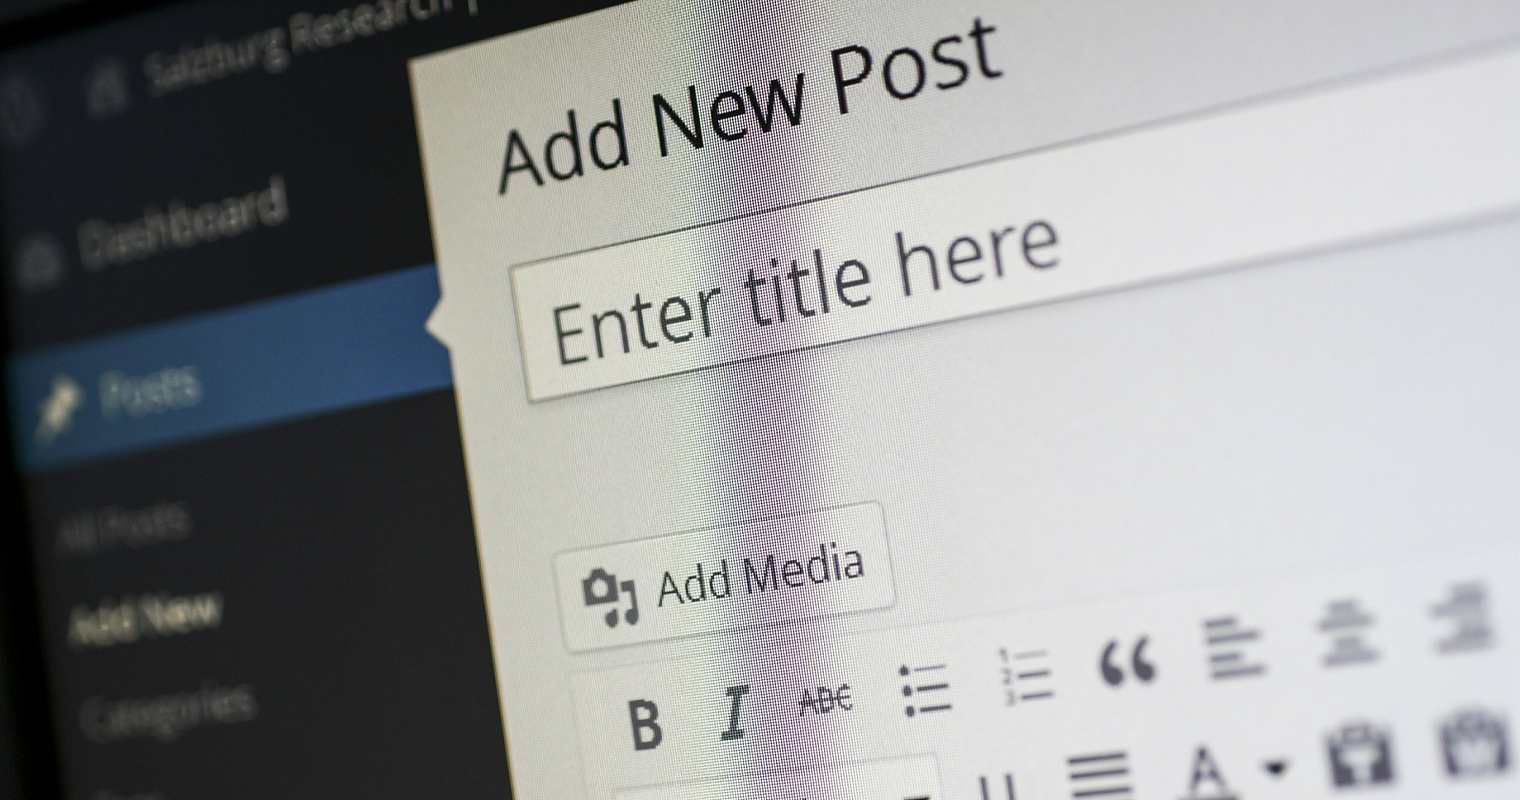 5 Blogging Tips to Help Boost Your Content Now